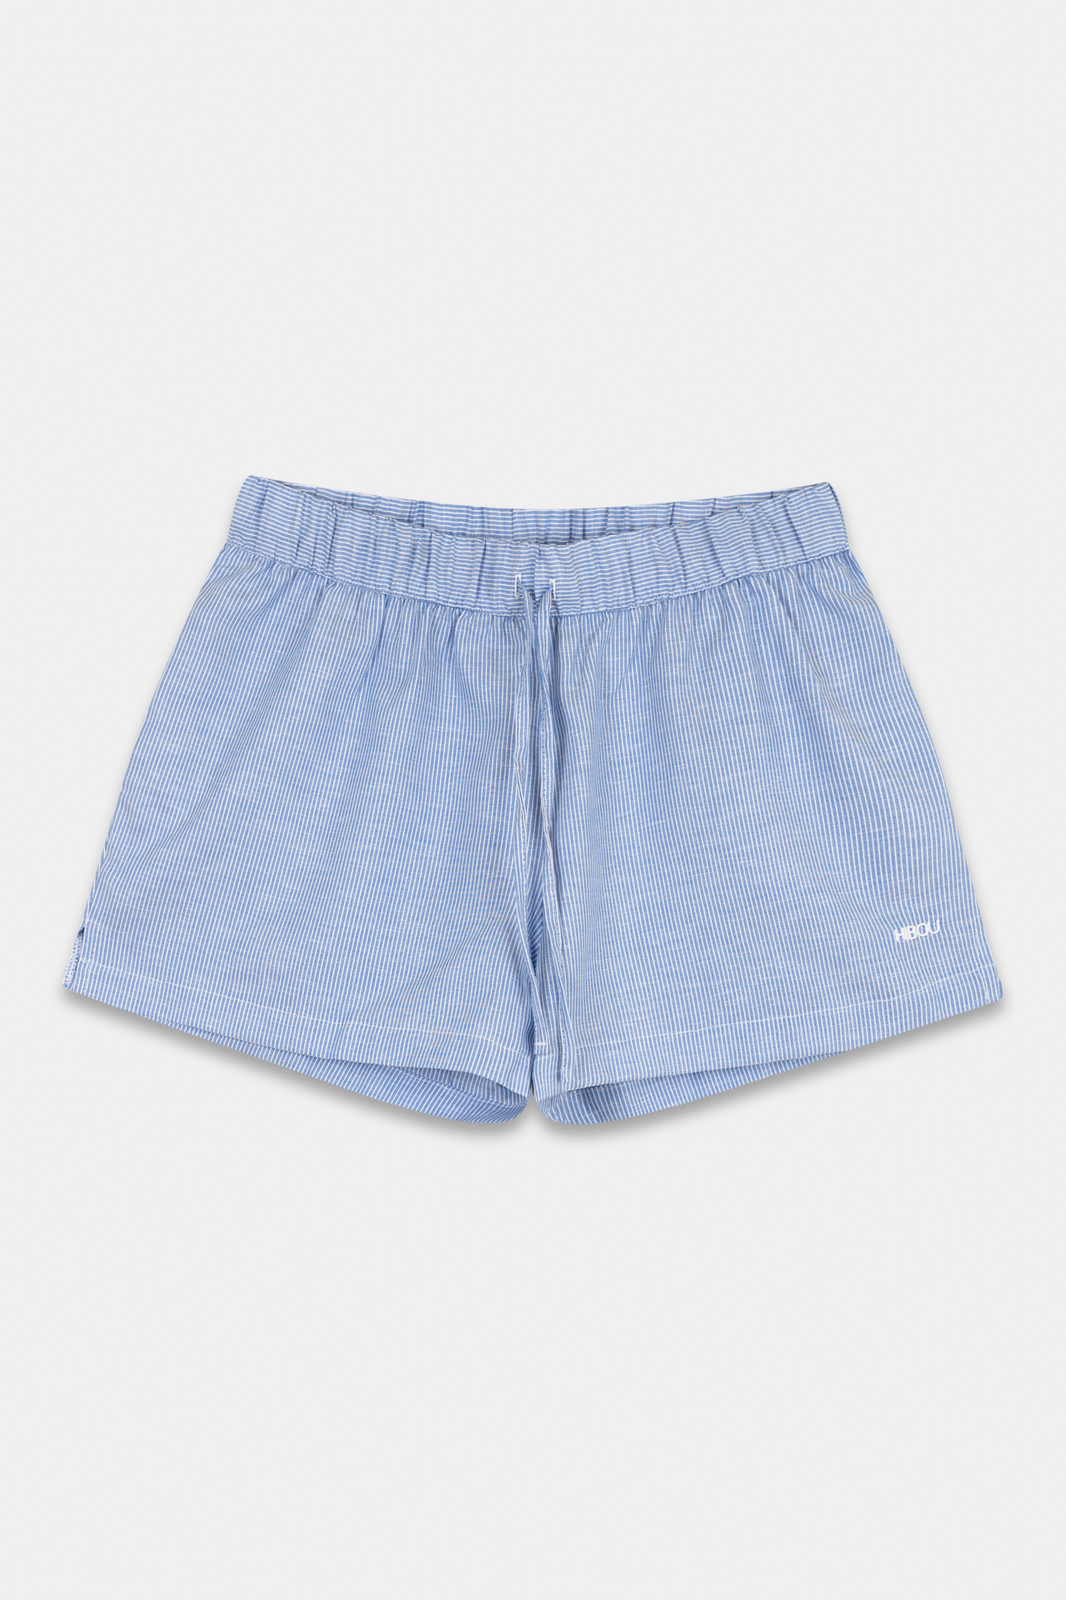 Blue Striped Shorts with Pockets